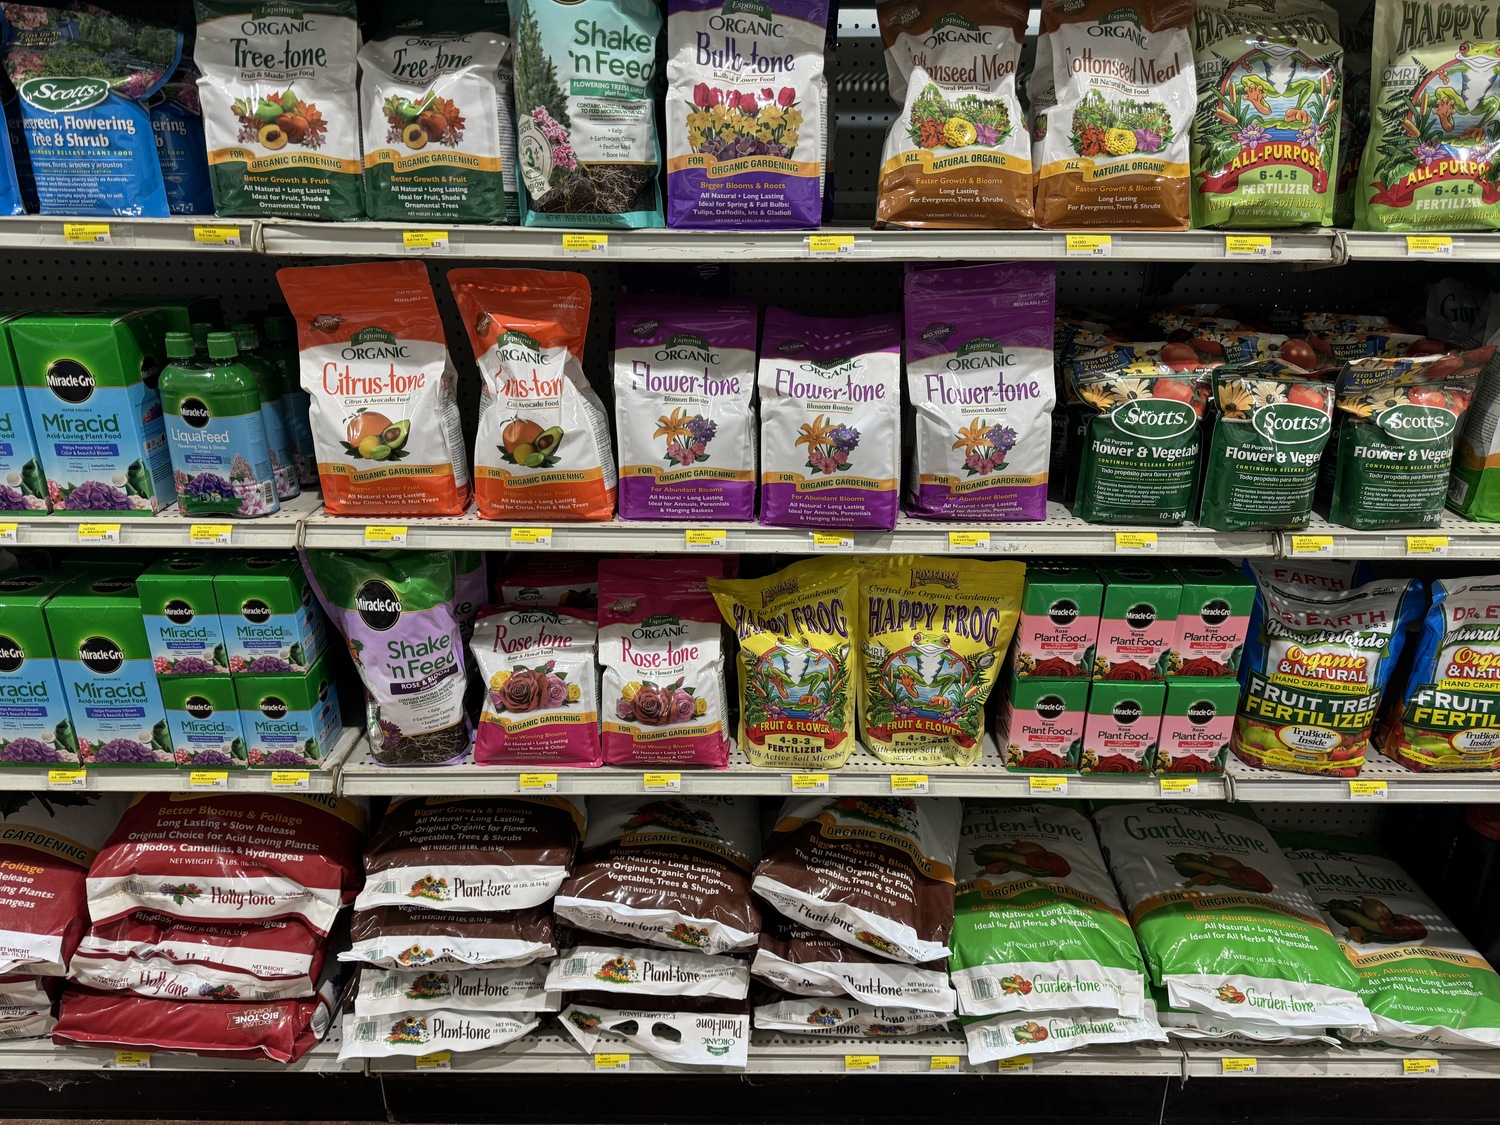 Even more fertilizer choices as we move down the aisle. Interestingly, only three of all these products tell us on the front of the bag or box what the fertilizer content ratio of nutrients is. One is an organic 6-4-5, another is 4-9-3 and the third is a pure chemical 10-10-10.  ANDREW MESSINGER